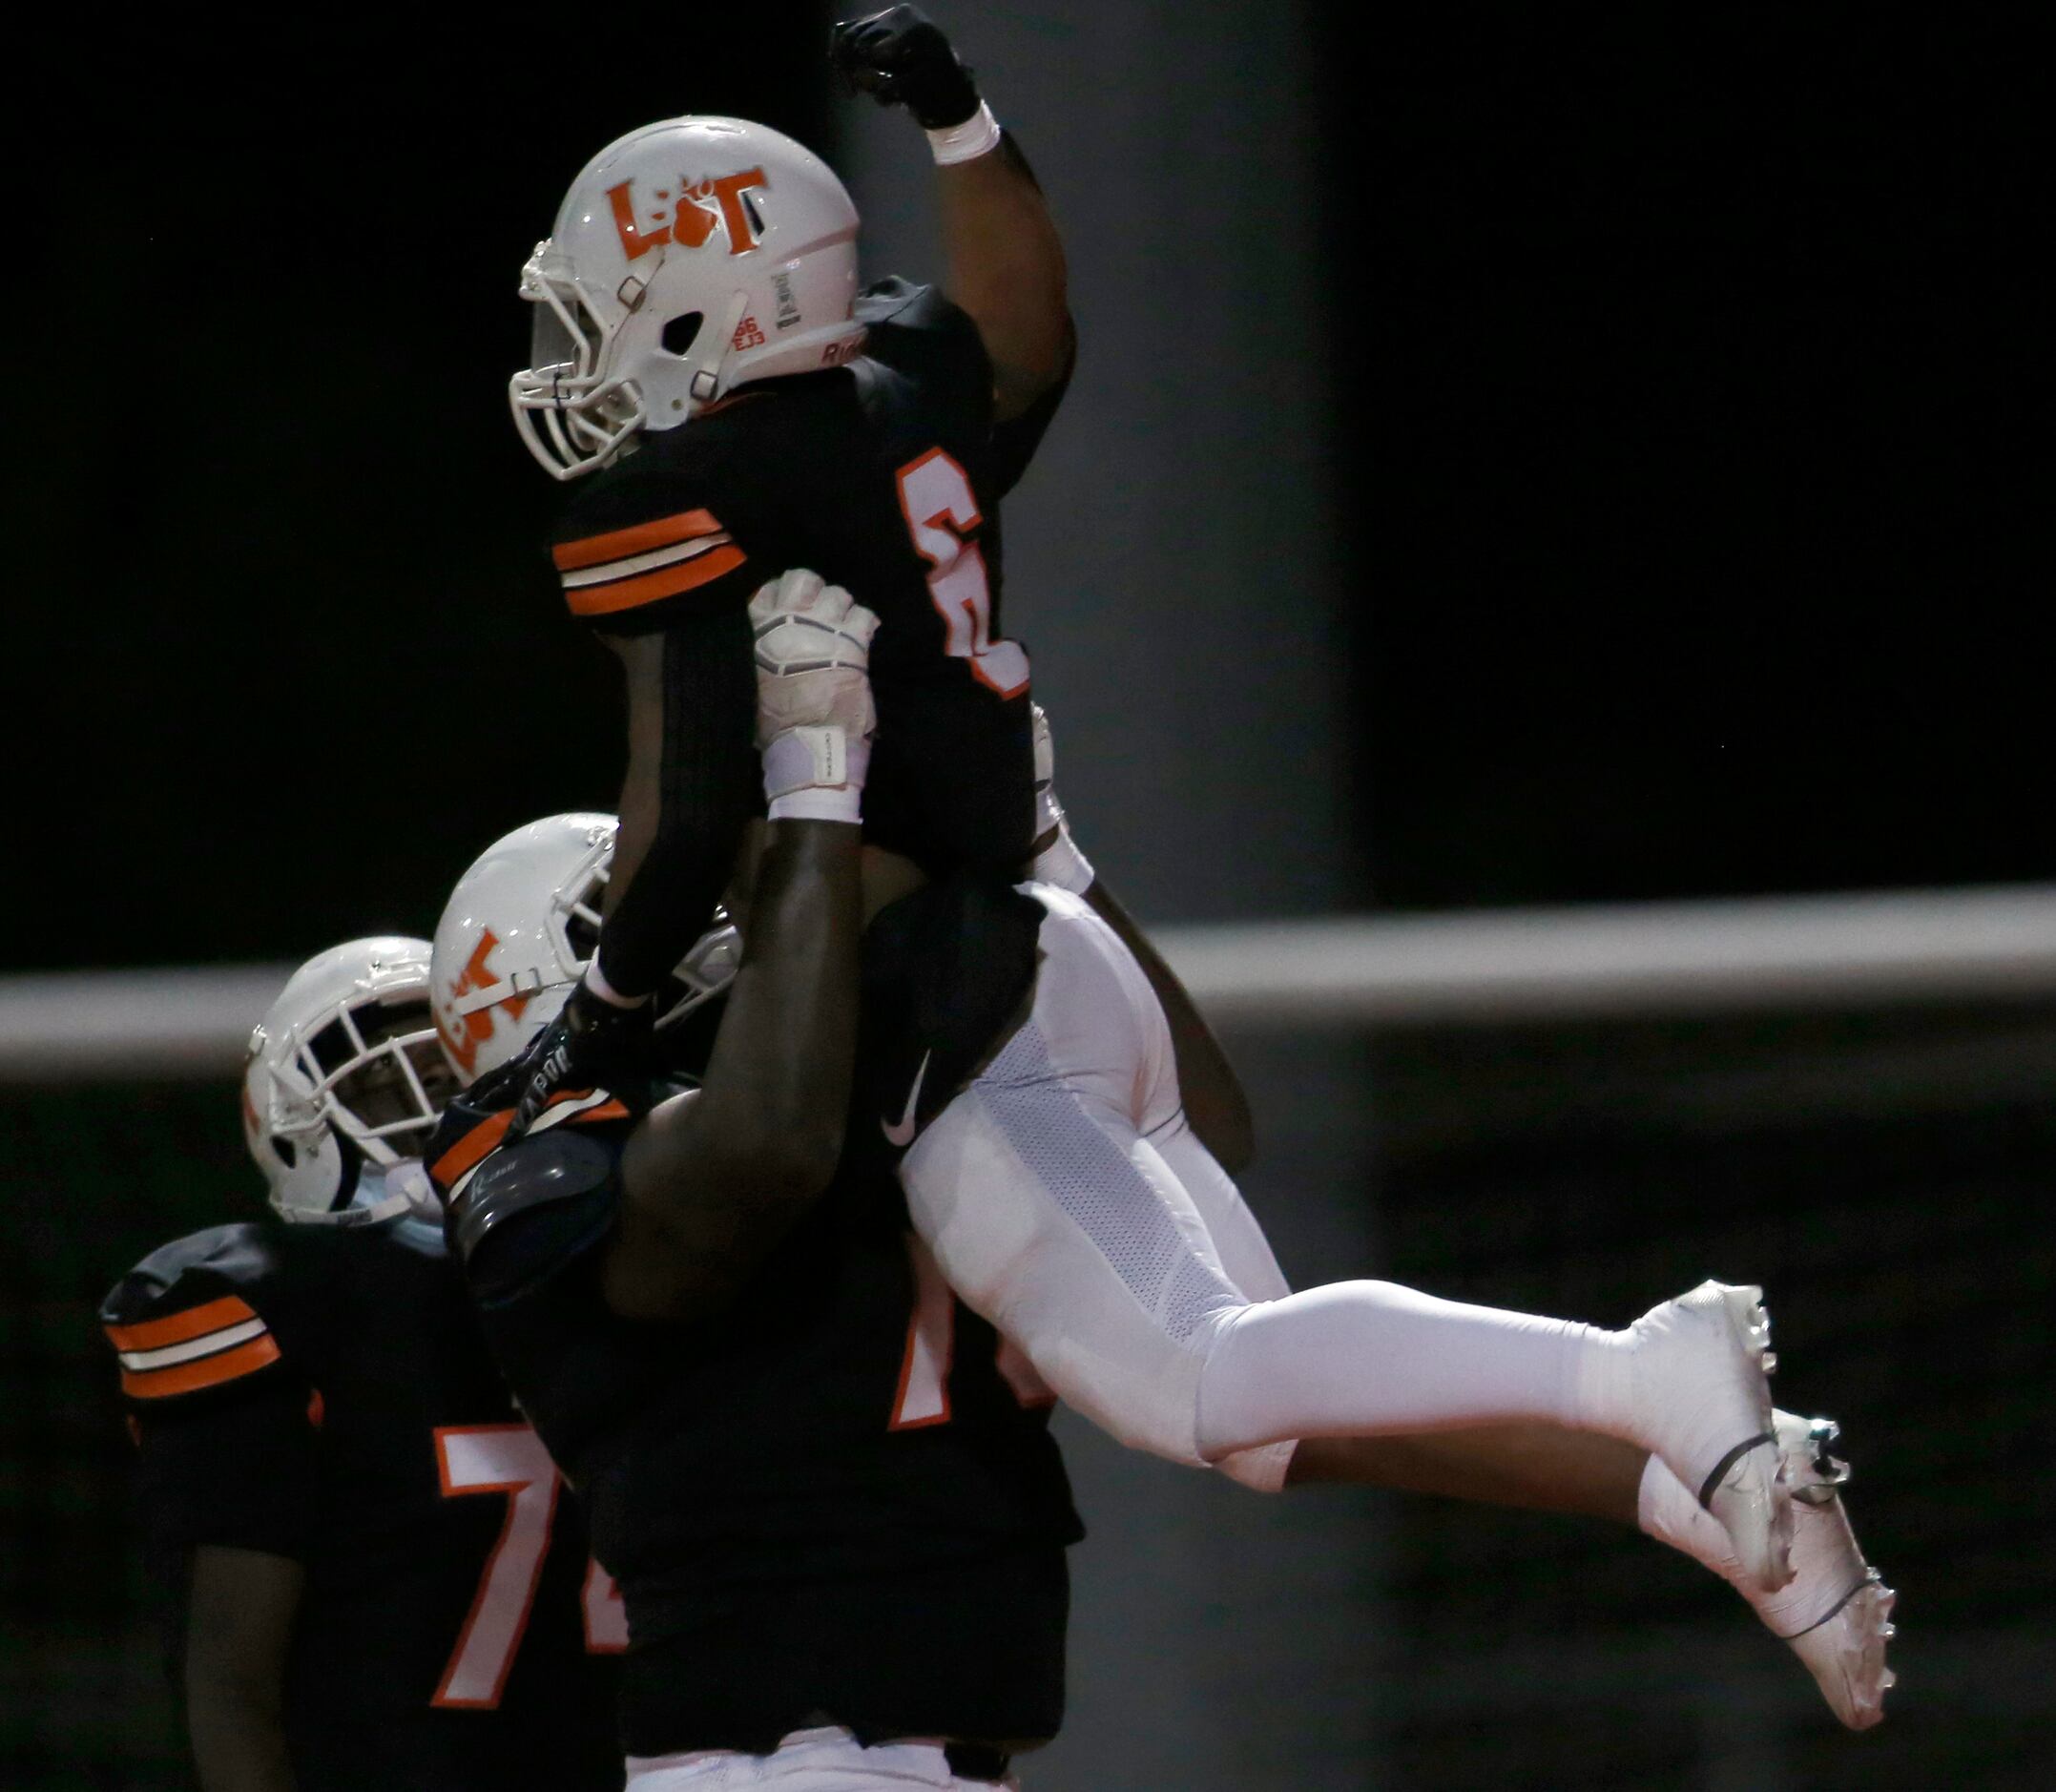 Lancaster running back DQ James (6) is lifted by offensive lineman Joseph Amos (73) as the...